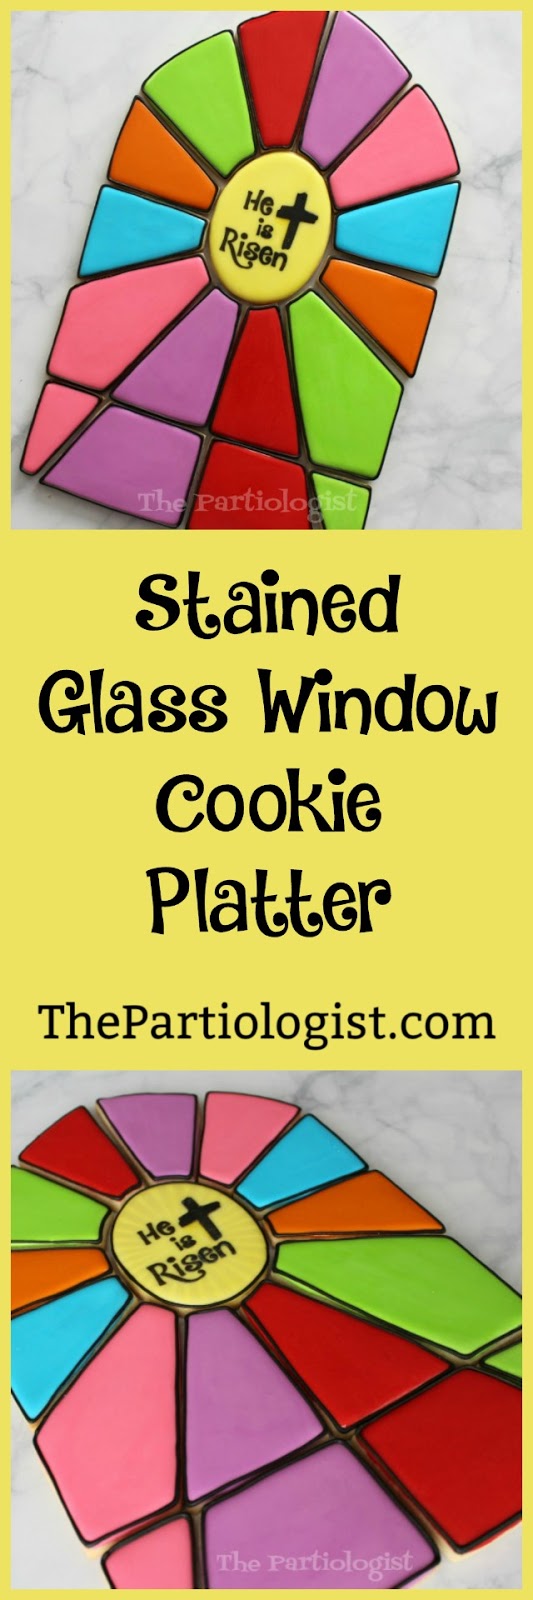 Stained Glass Cookie Window | The Bearfoot Baker